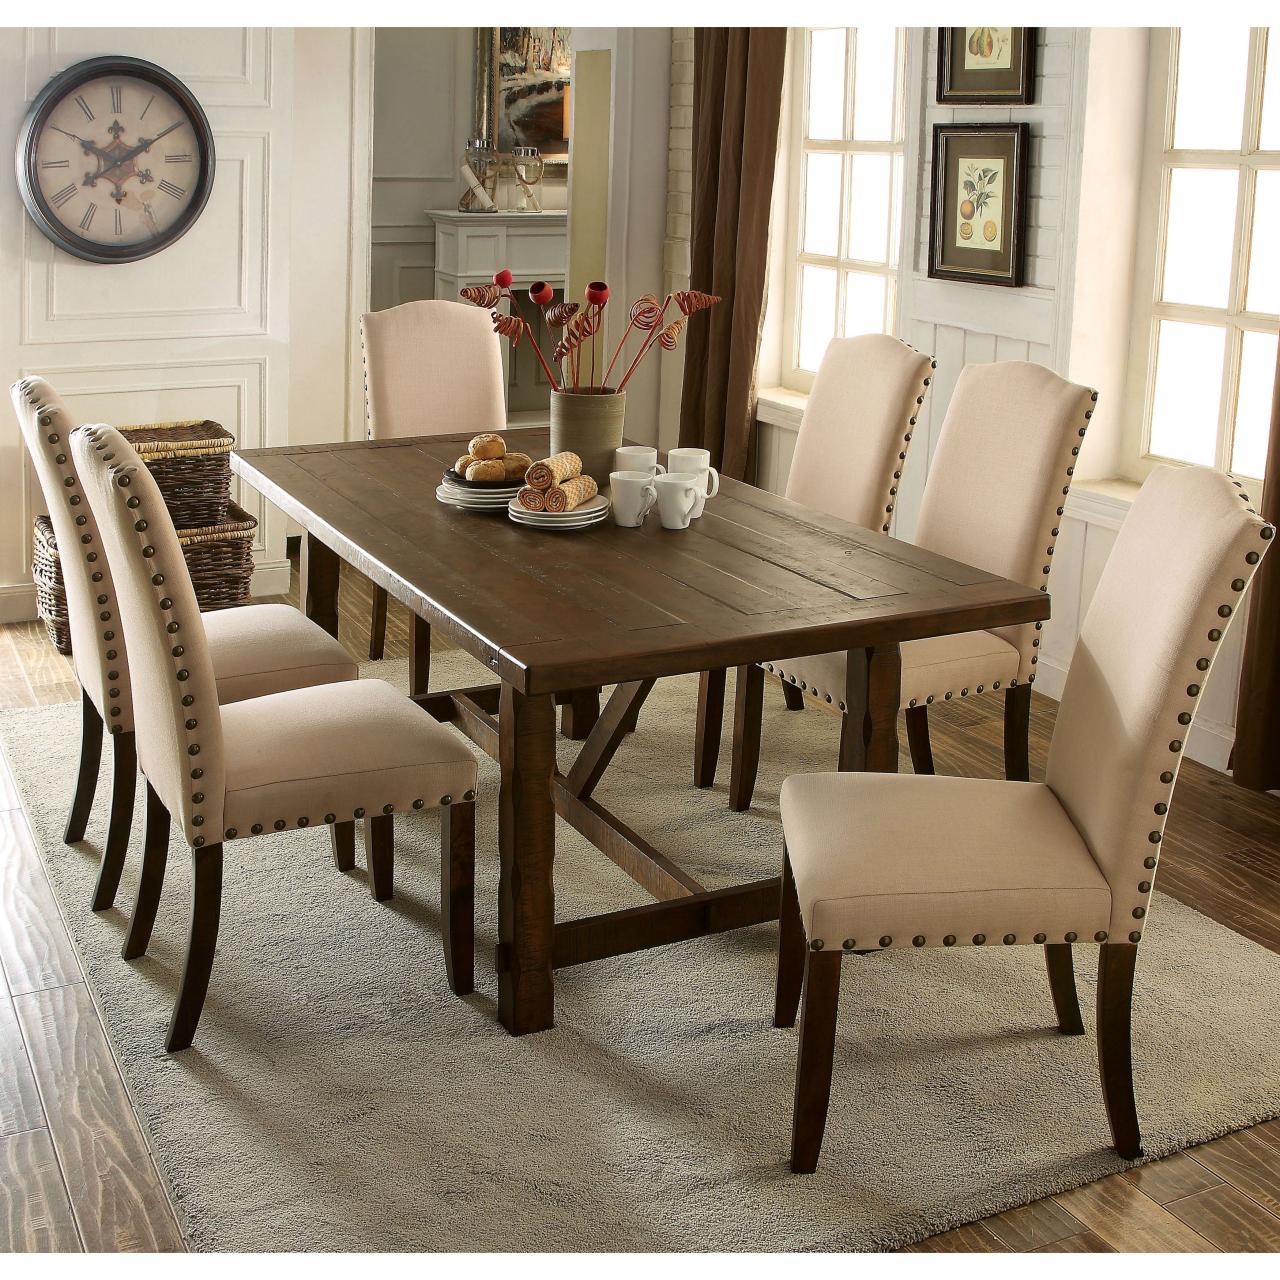 Overstock dining furniture